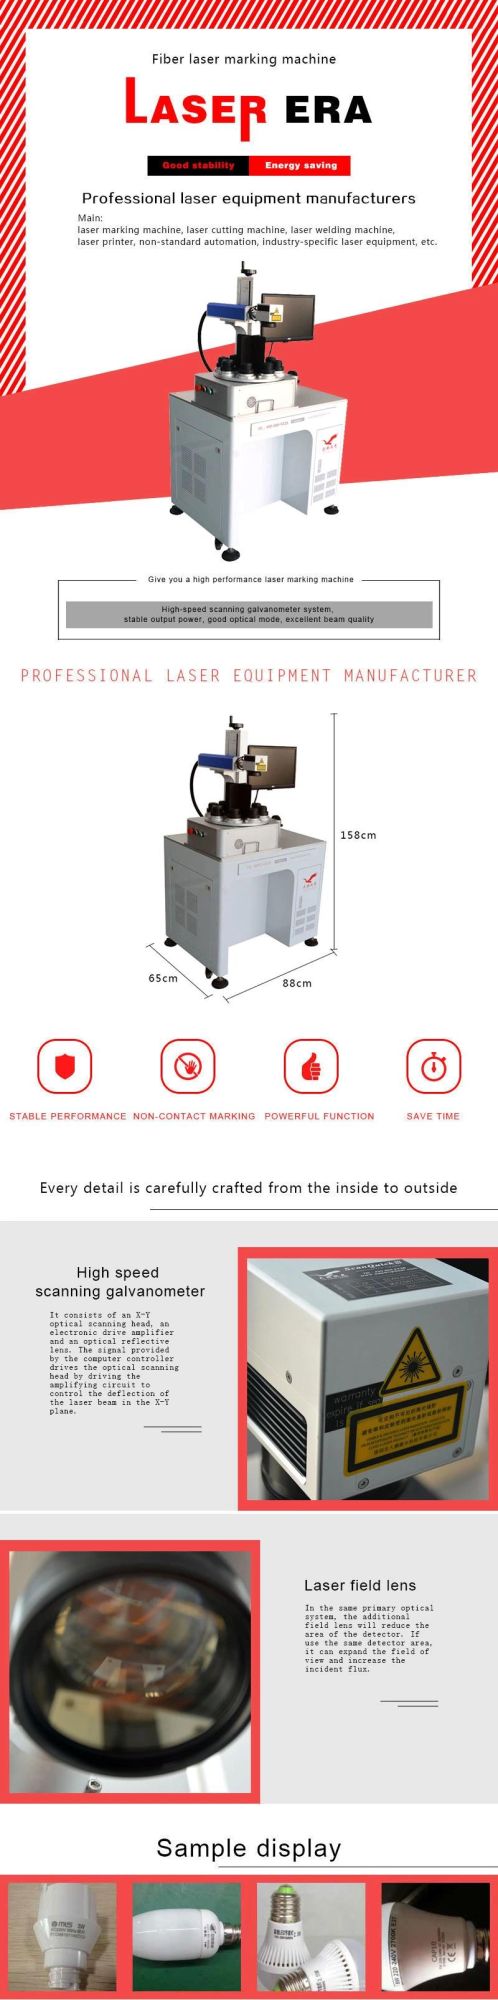 20 Watts Laser Marking Machine for Marking LED Bulbs by Ylp Type